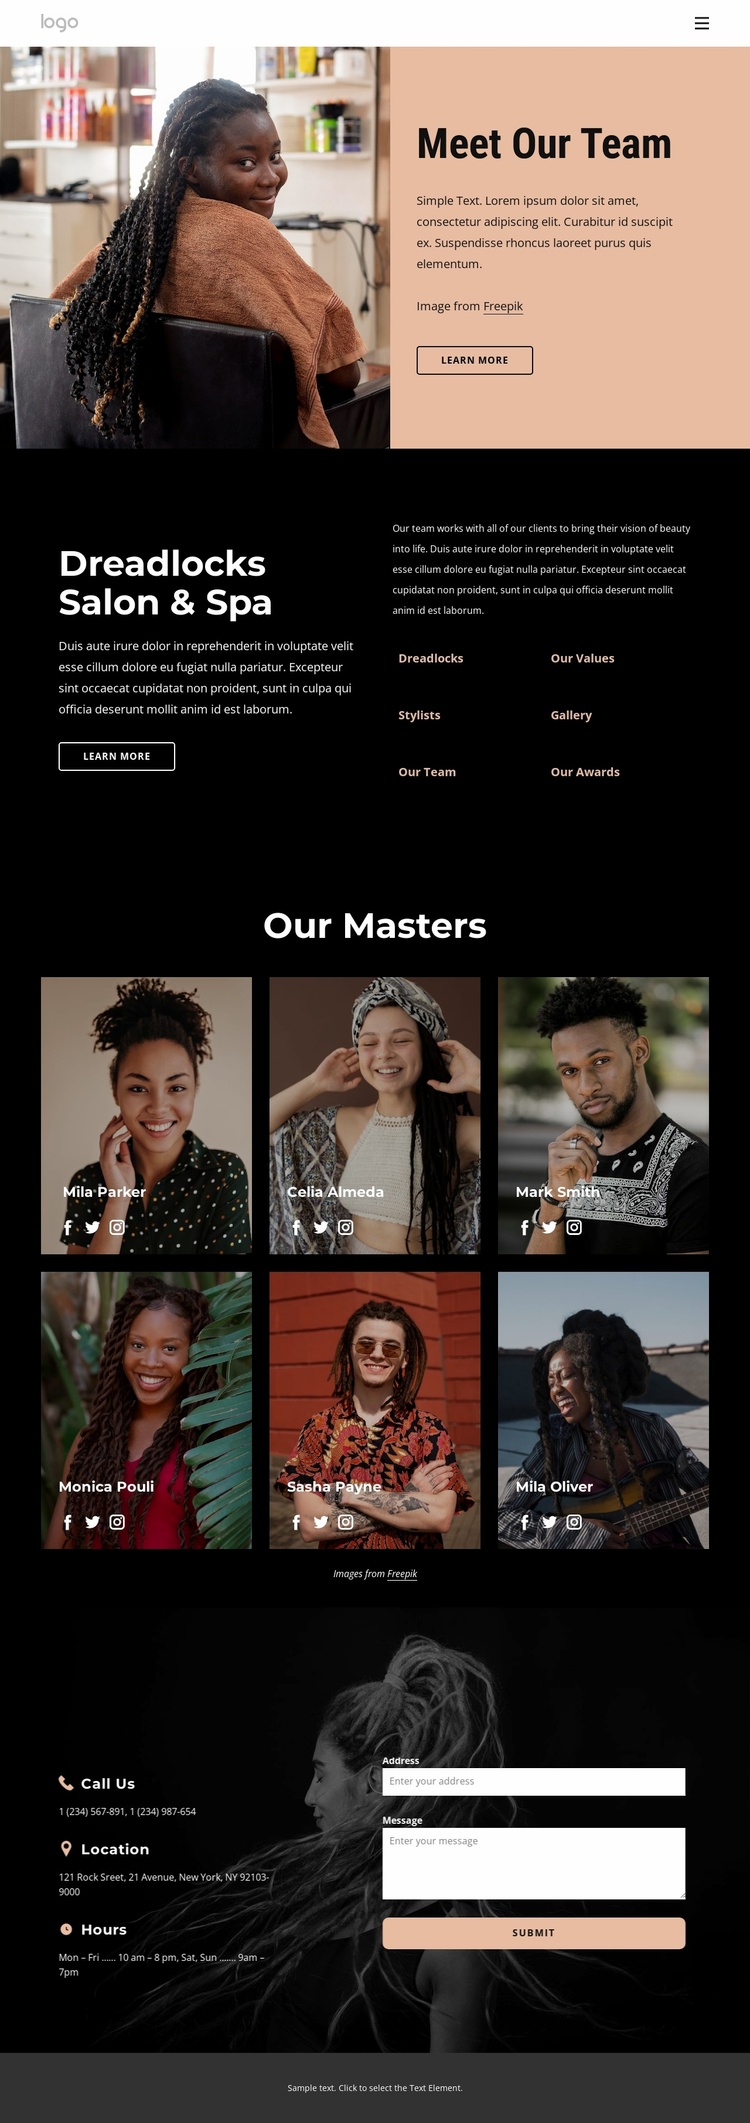 Meet our masters eCommerce Template